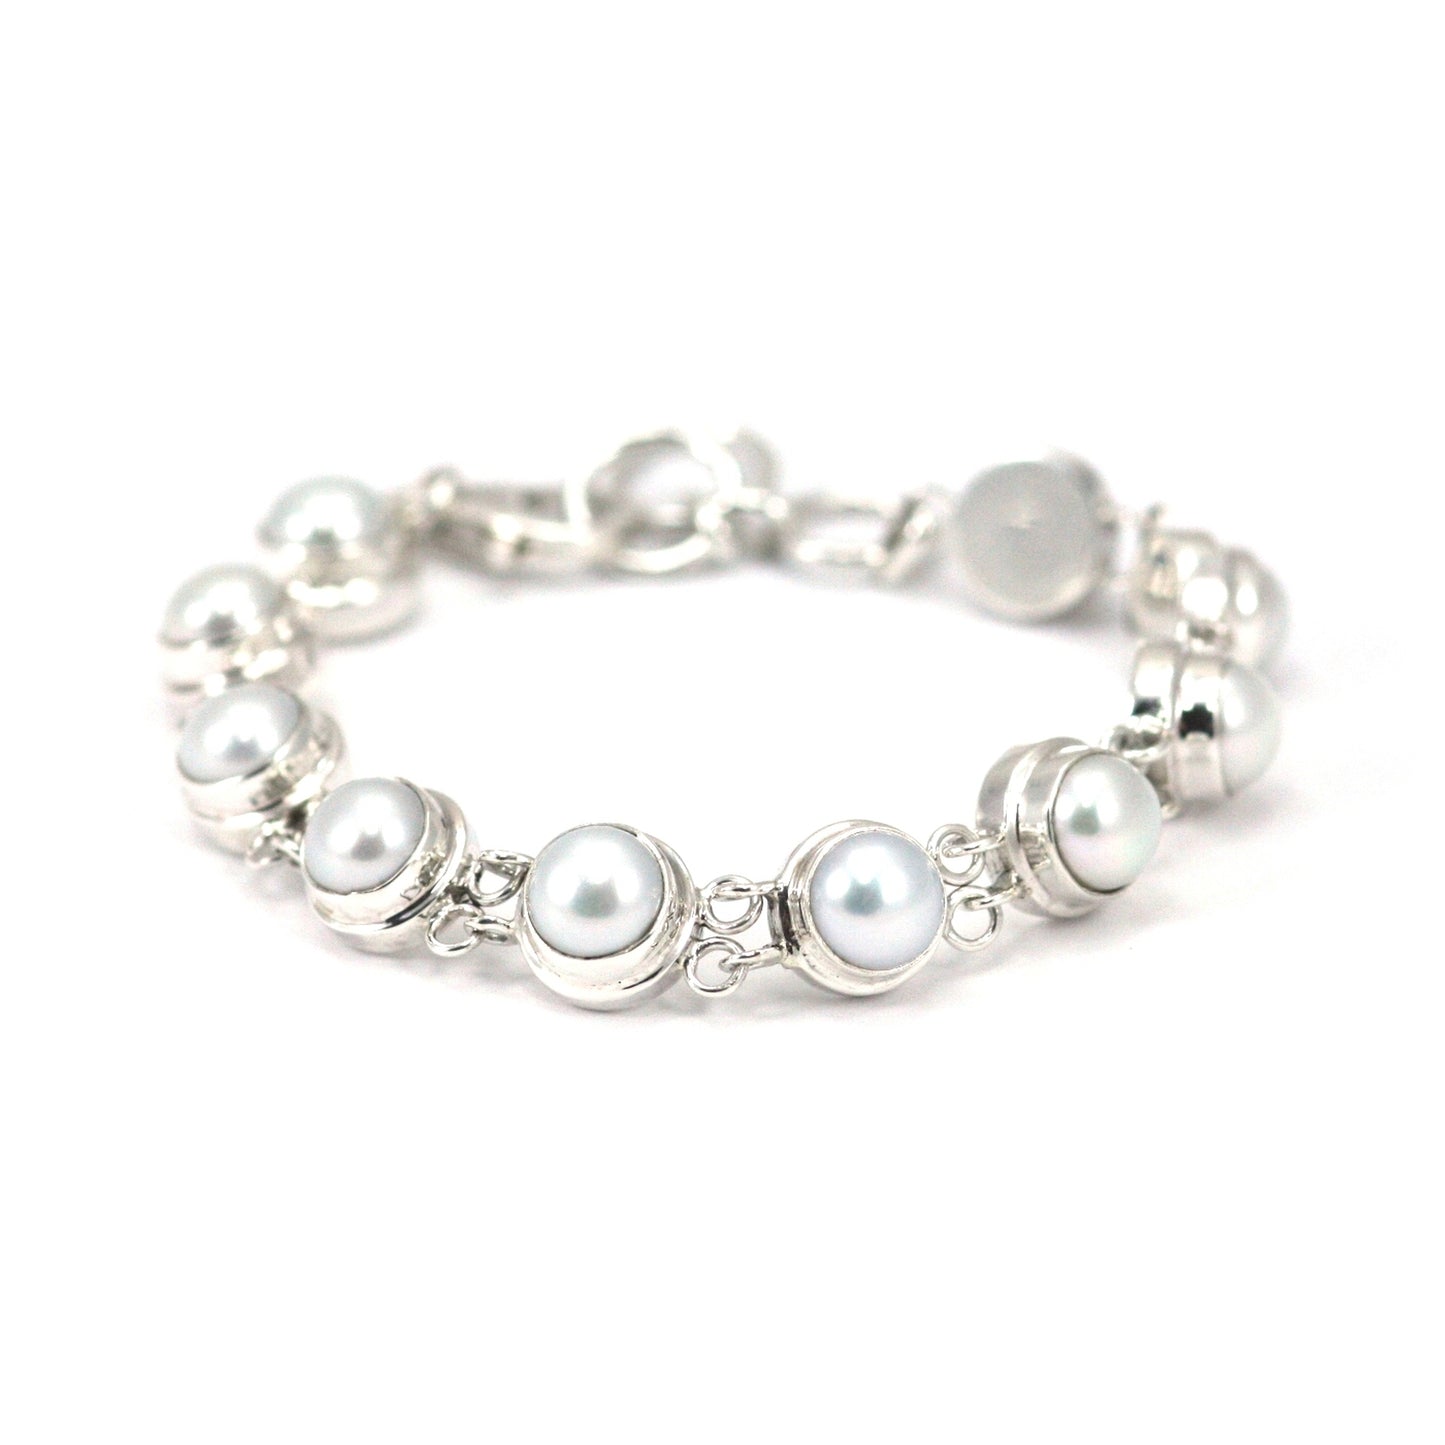 Silver bracelet with ten round links with white pearls.